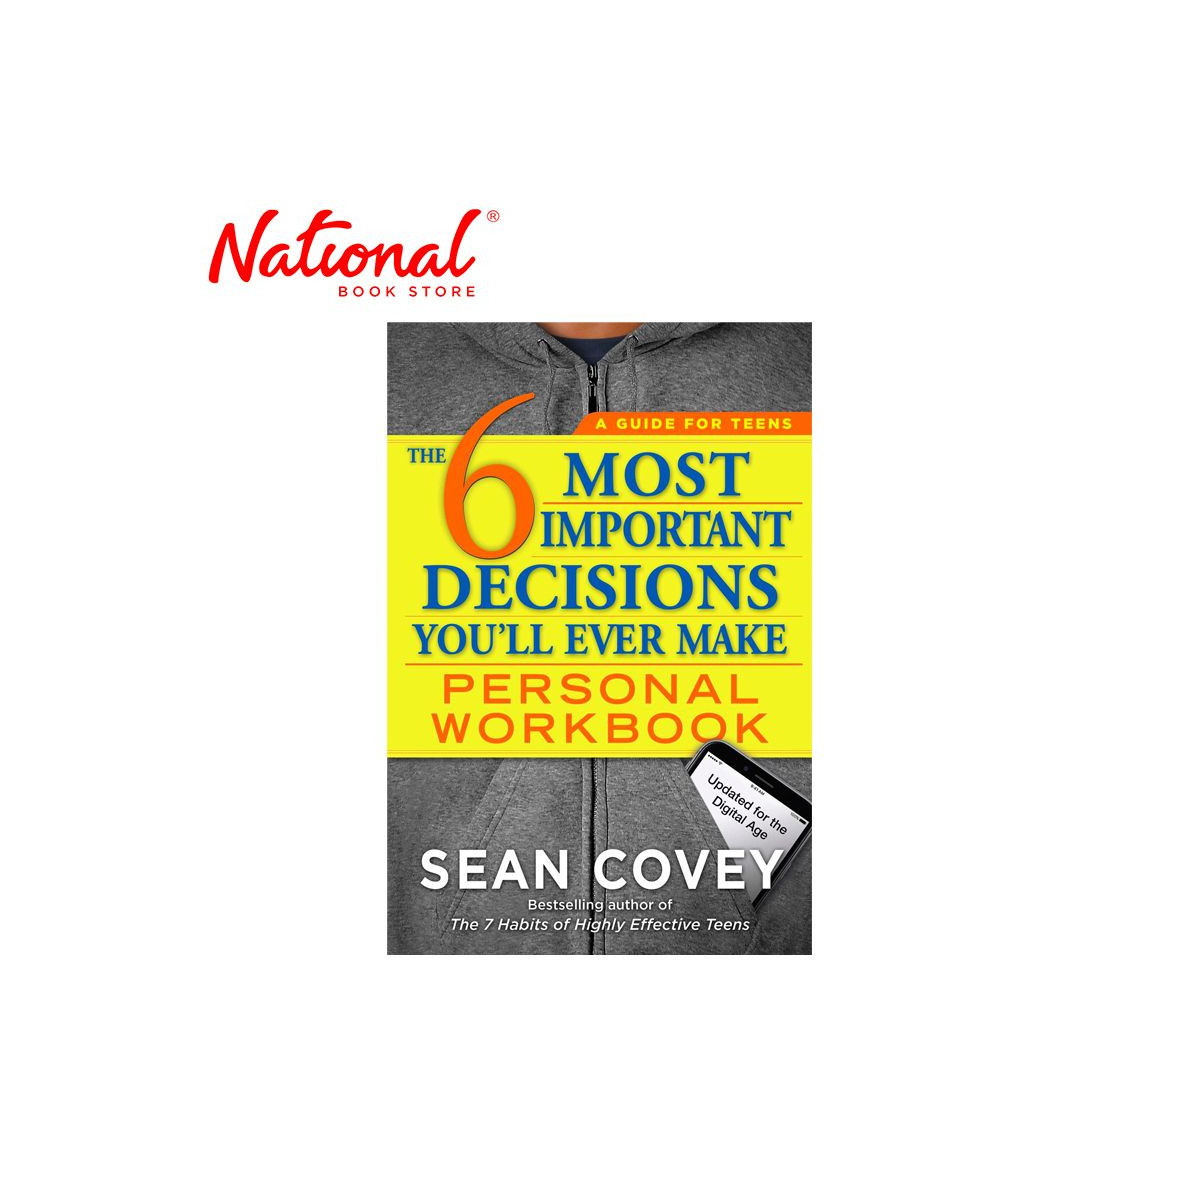 The 6 Most Important Decisions You'Ll Ever Make Personal Workbook Trade Paperback by Sean Covey